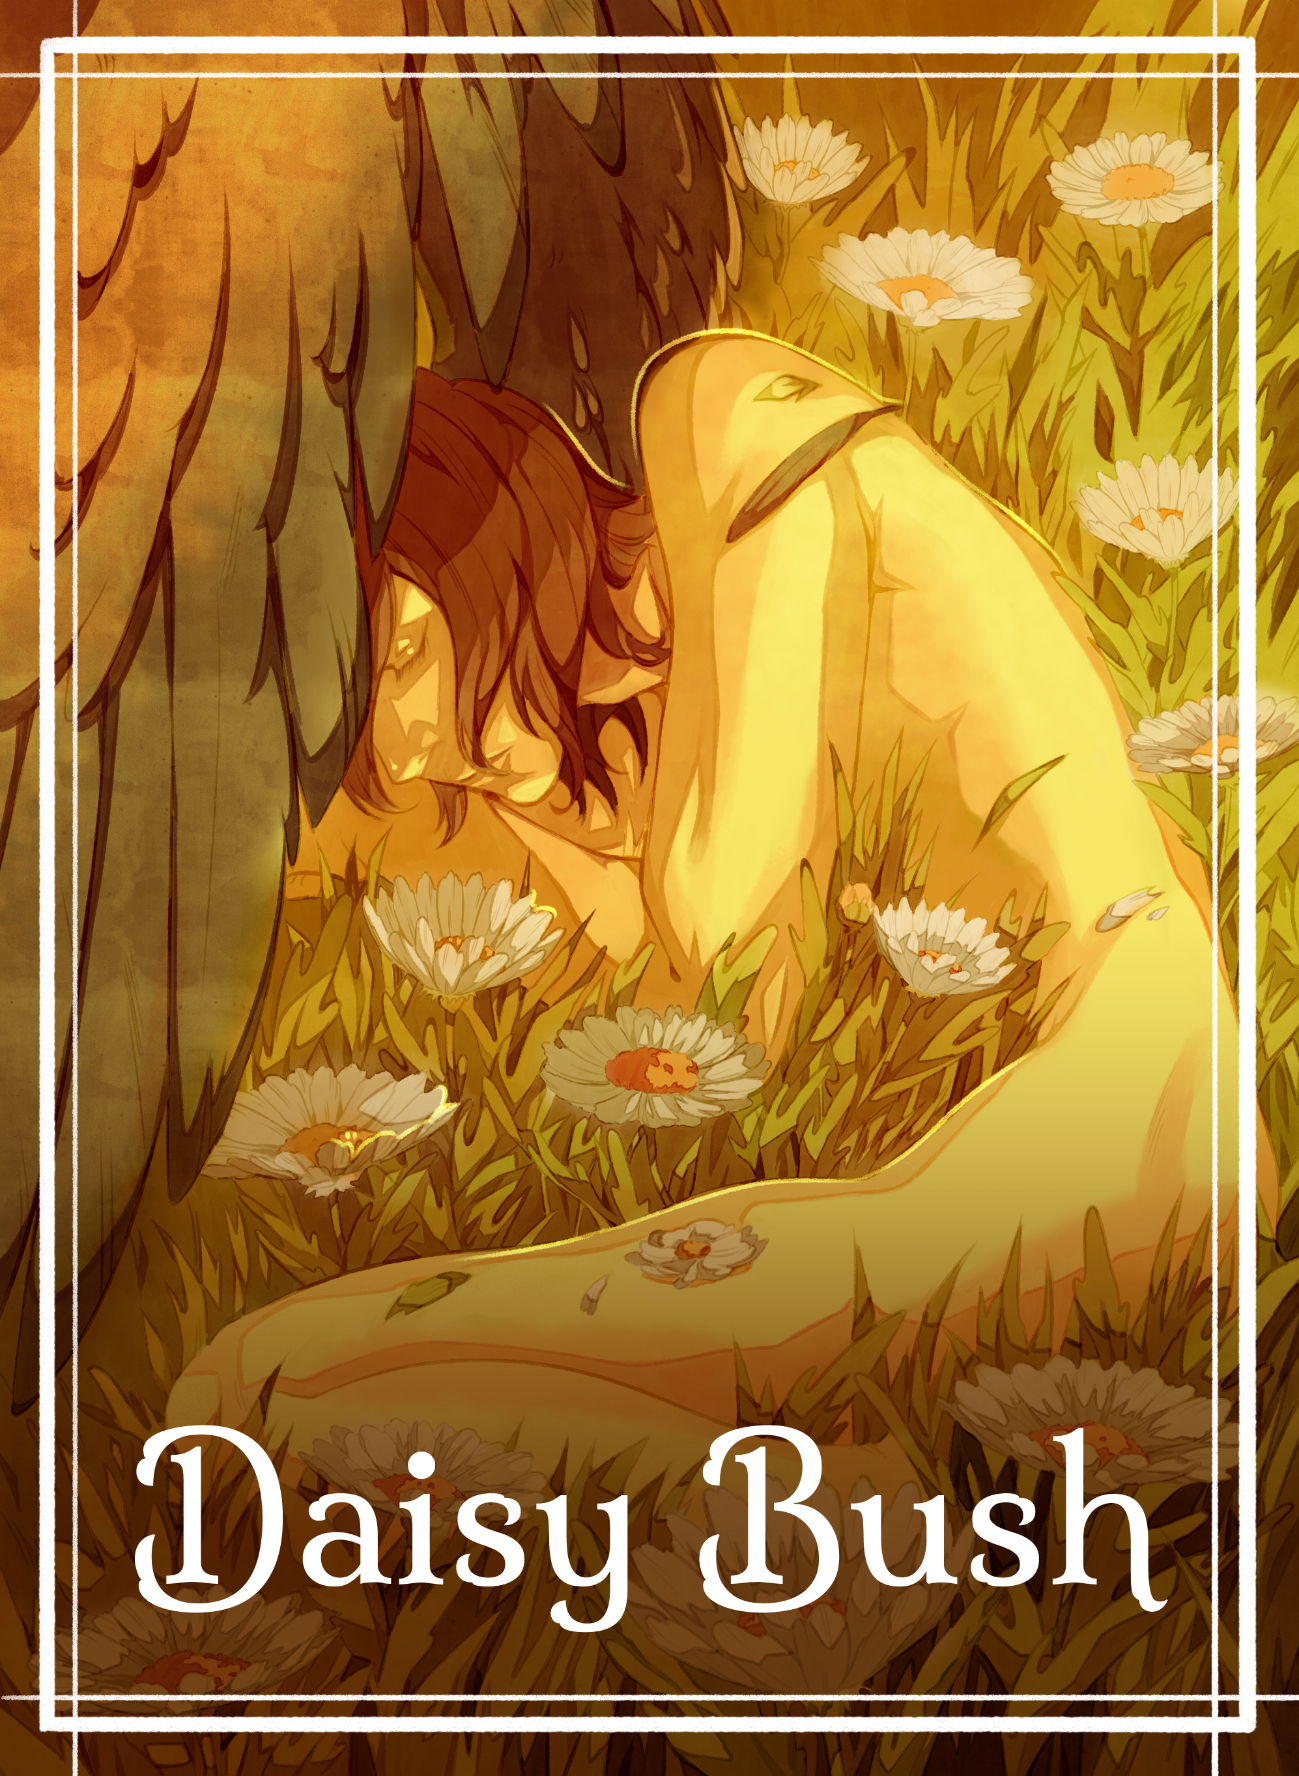 The cover of the comic "Daisy Bush" by 4threset. A naked individual, with shoulder-length brown hair, lays on their side in a field of daisies, their body shining as the yellow light of the sun hits them. A black wing partially covers their face to block out the light.